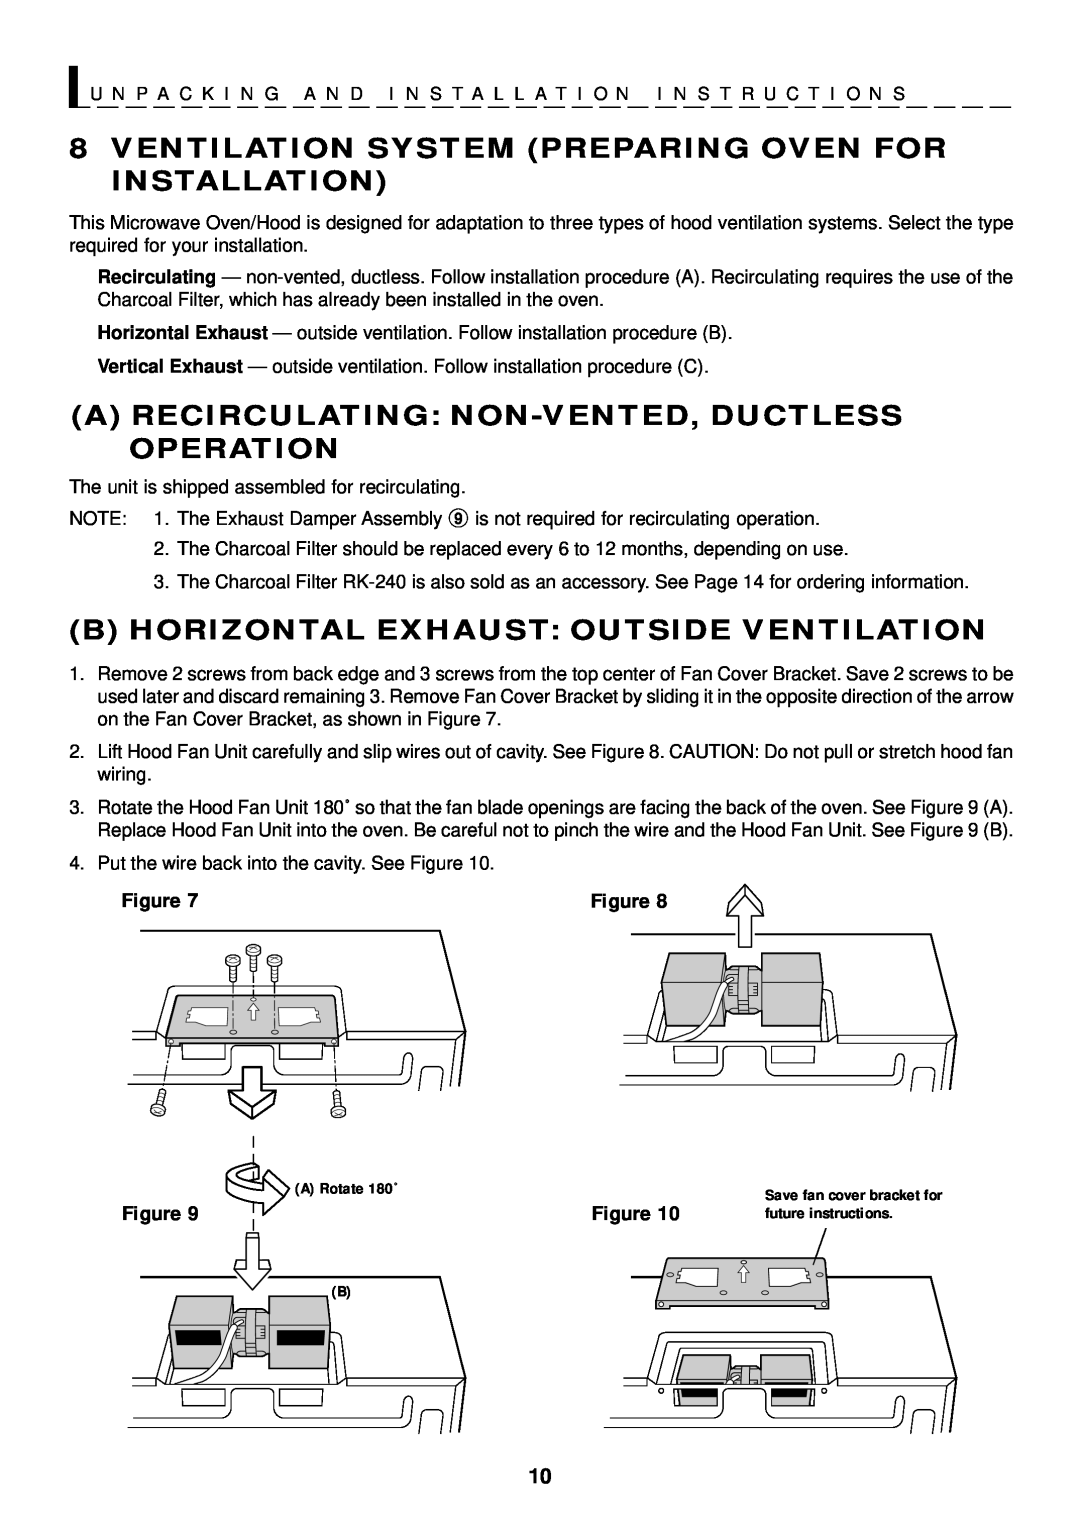 Sharp R-1500, R-1505, R-1501, R-1506 Arecirculating Non-Vented,Ductless Operation, Bhorizontal Exhaust Outside Ventilation 